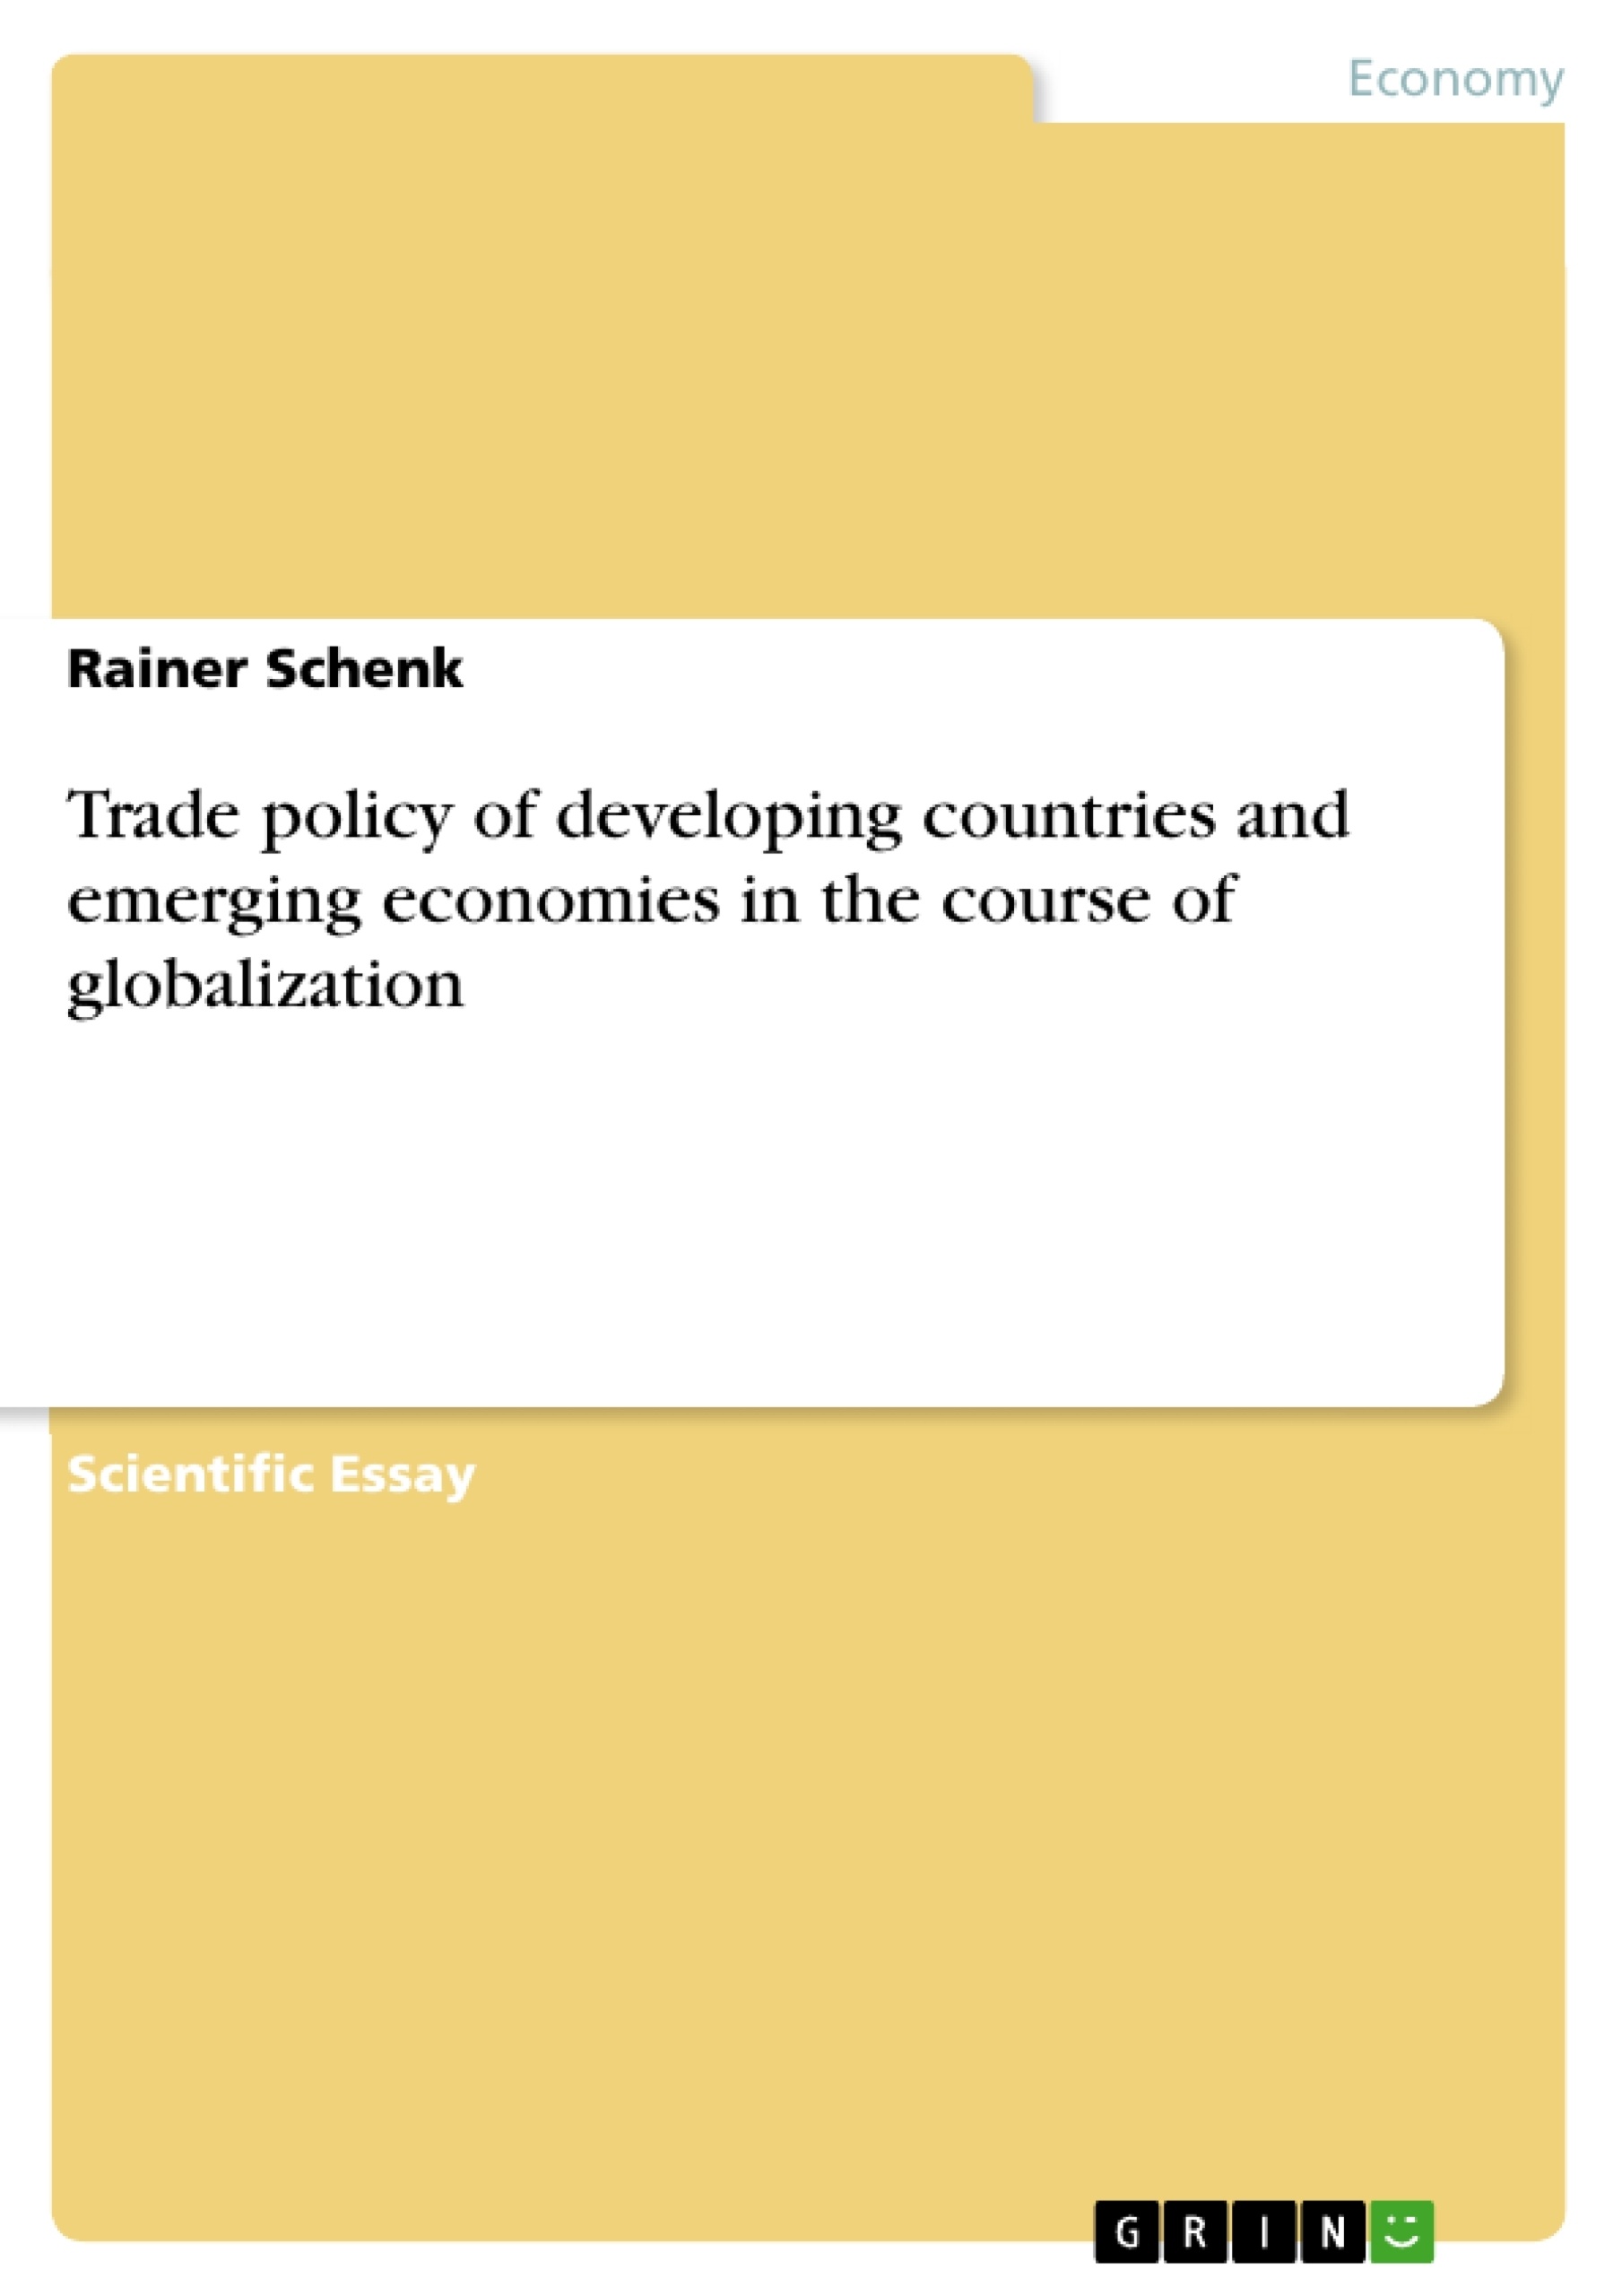 Title: Trade policy of developing countries and emerging economies in the course of globalization